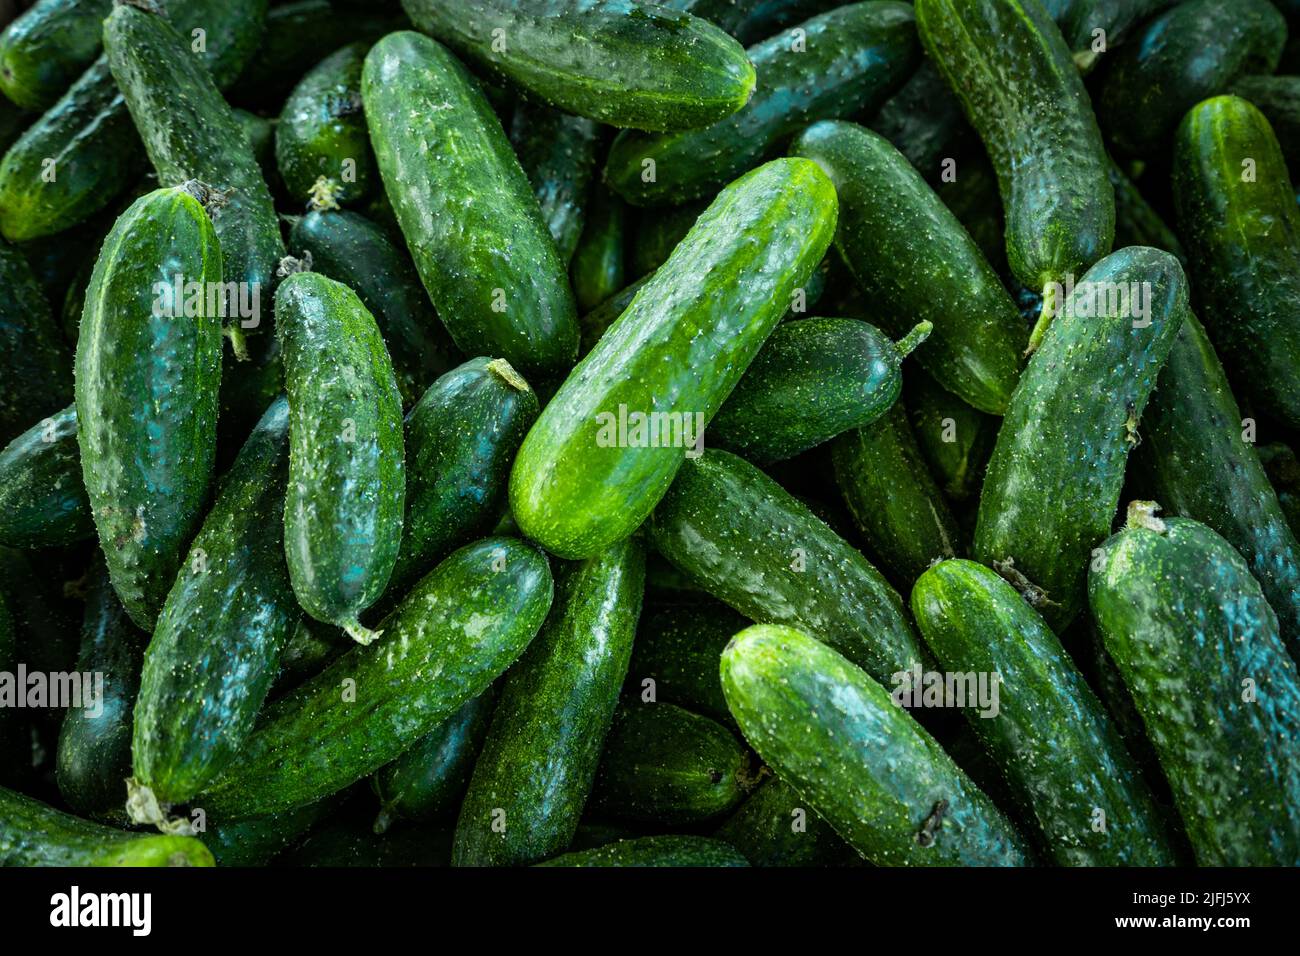 Pile of cucumbers. Cucumbers from the field Stock Photo